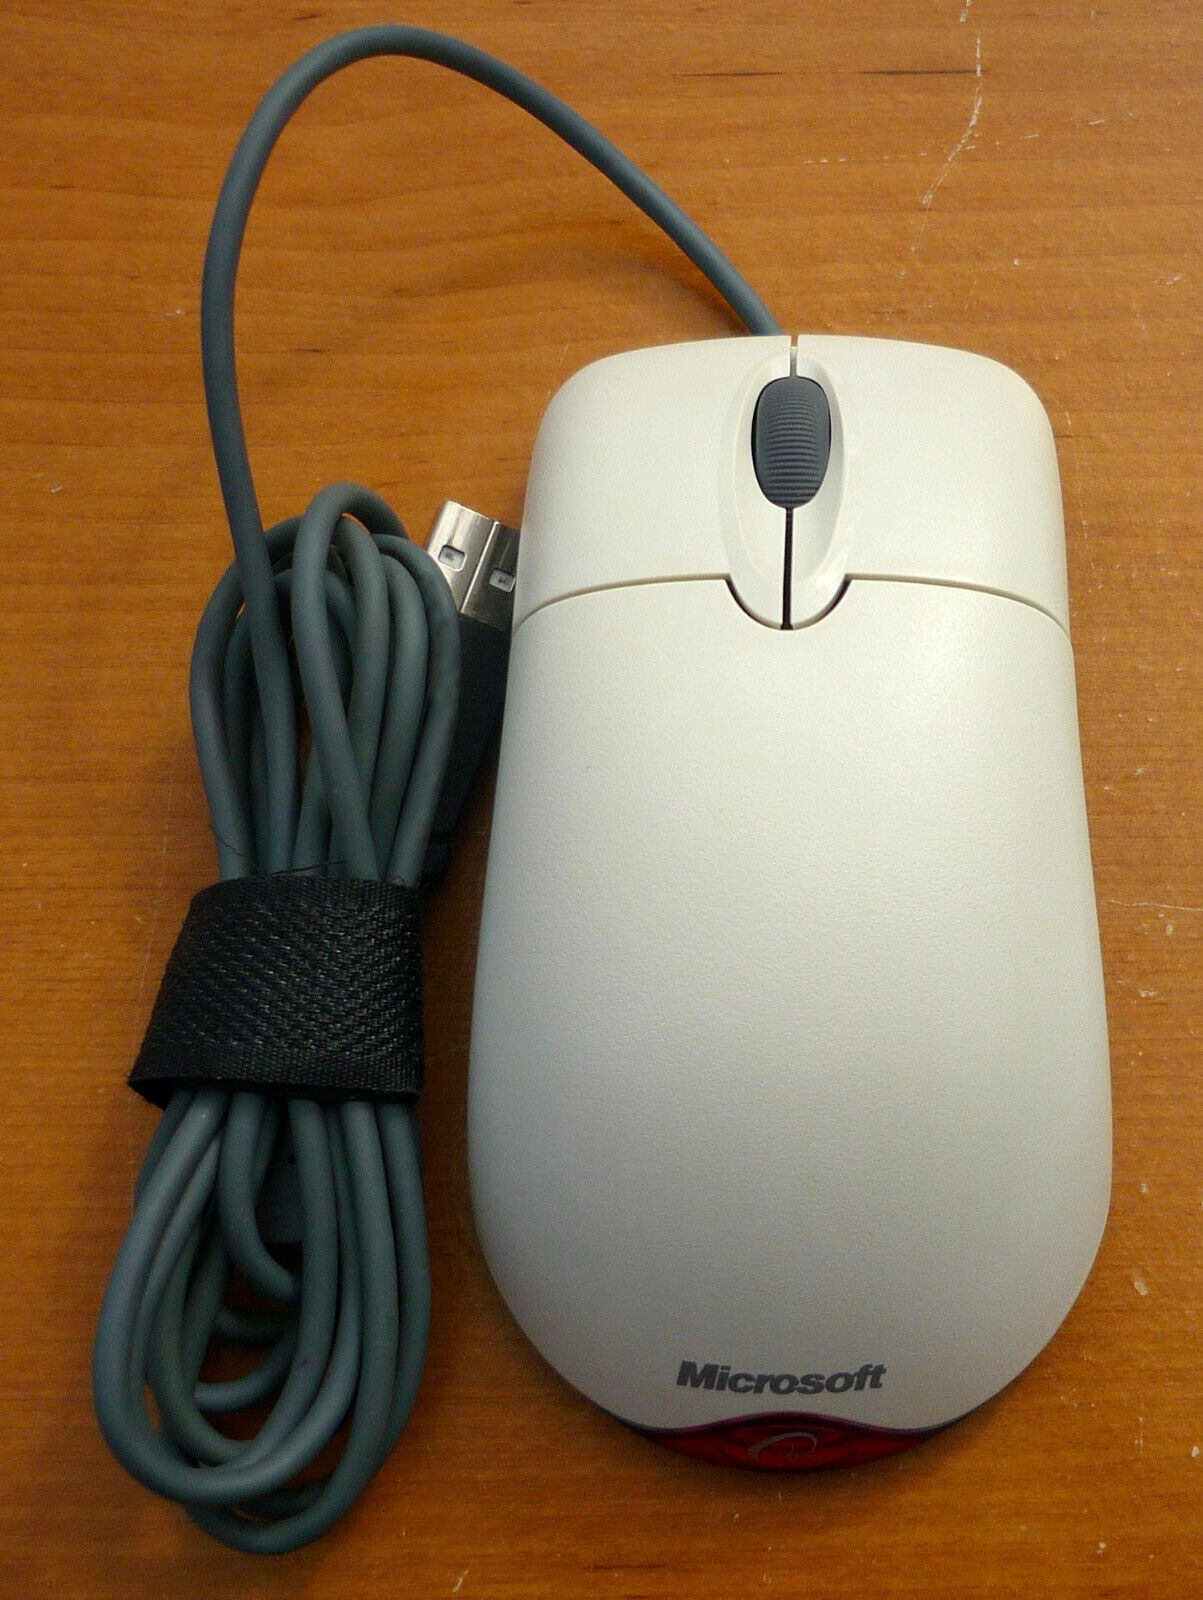 Vintage Off White Microsoft Wheel Mouse Optical USB Mouse 1.1/1.1a - Good Cond